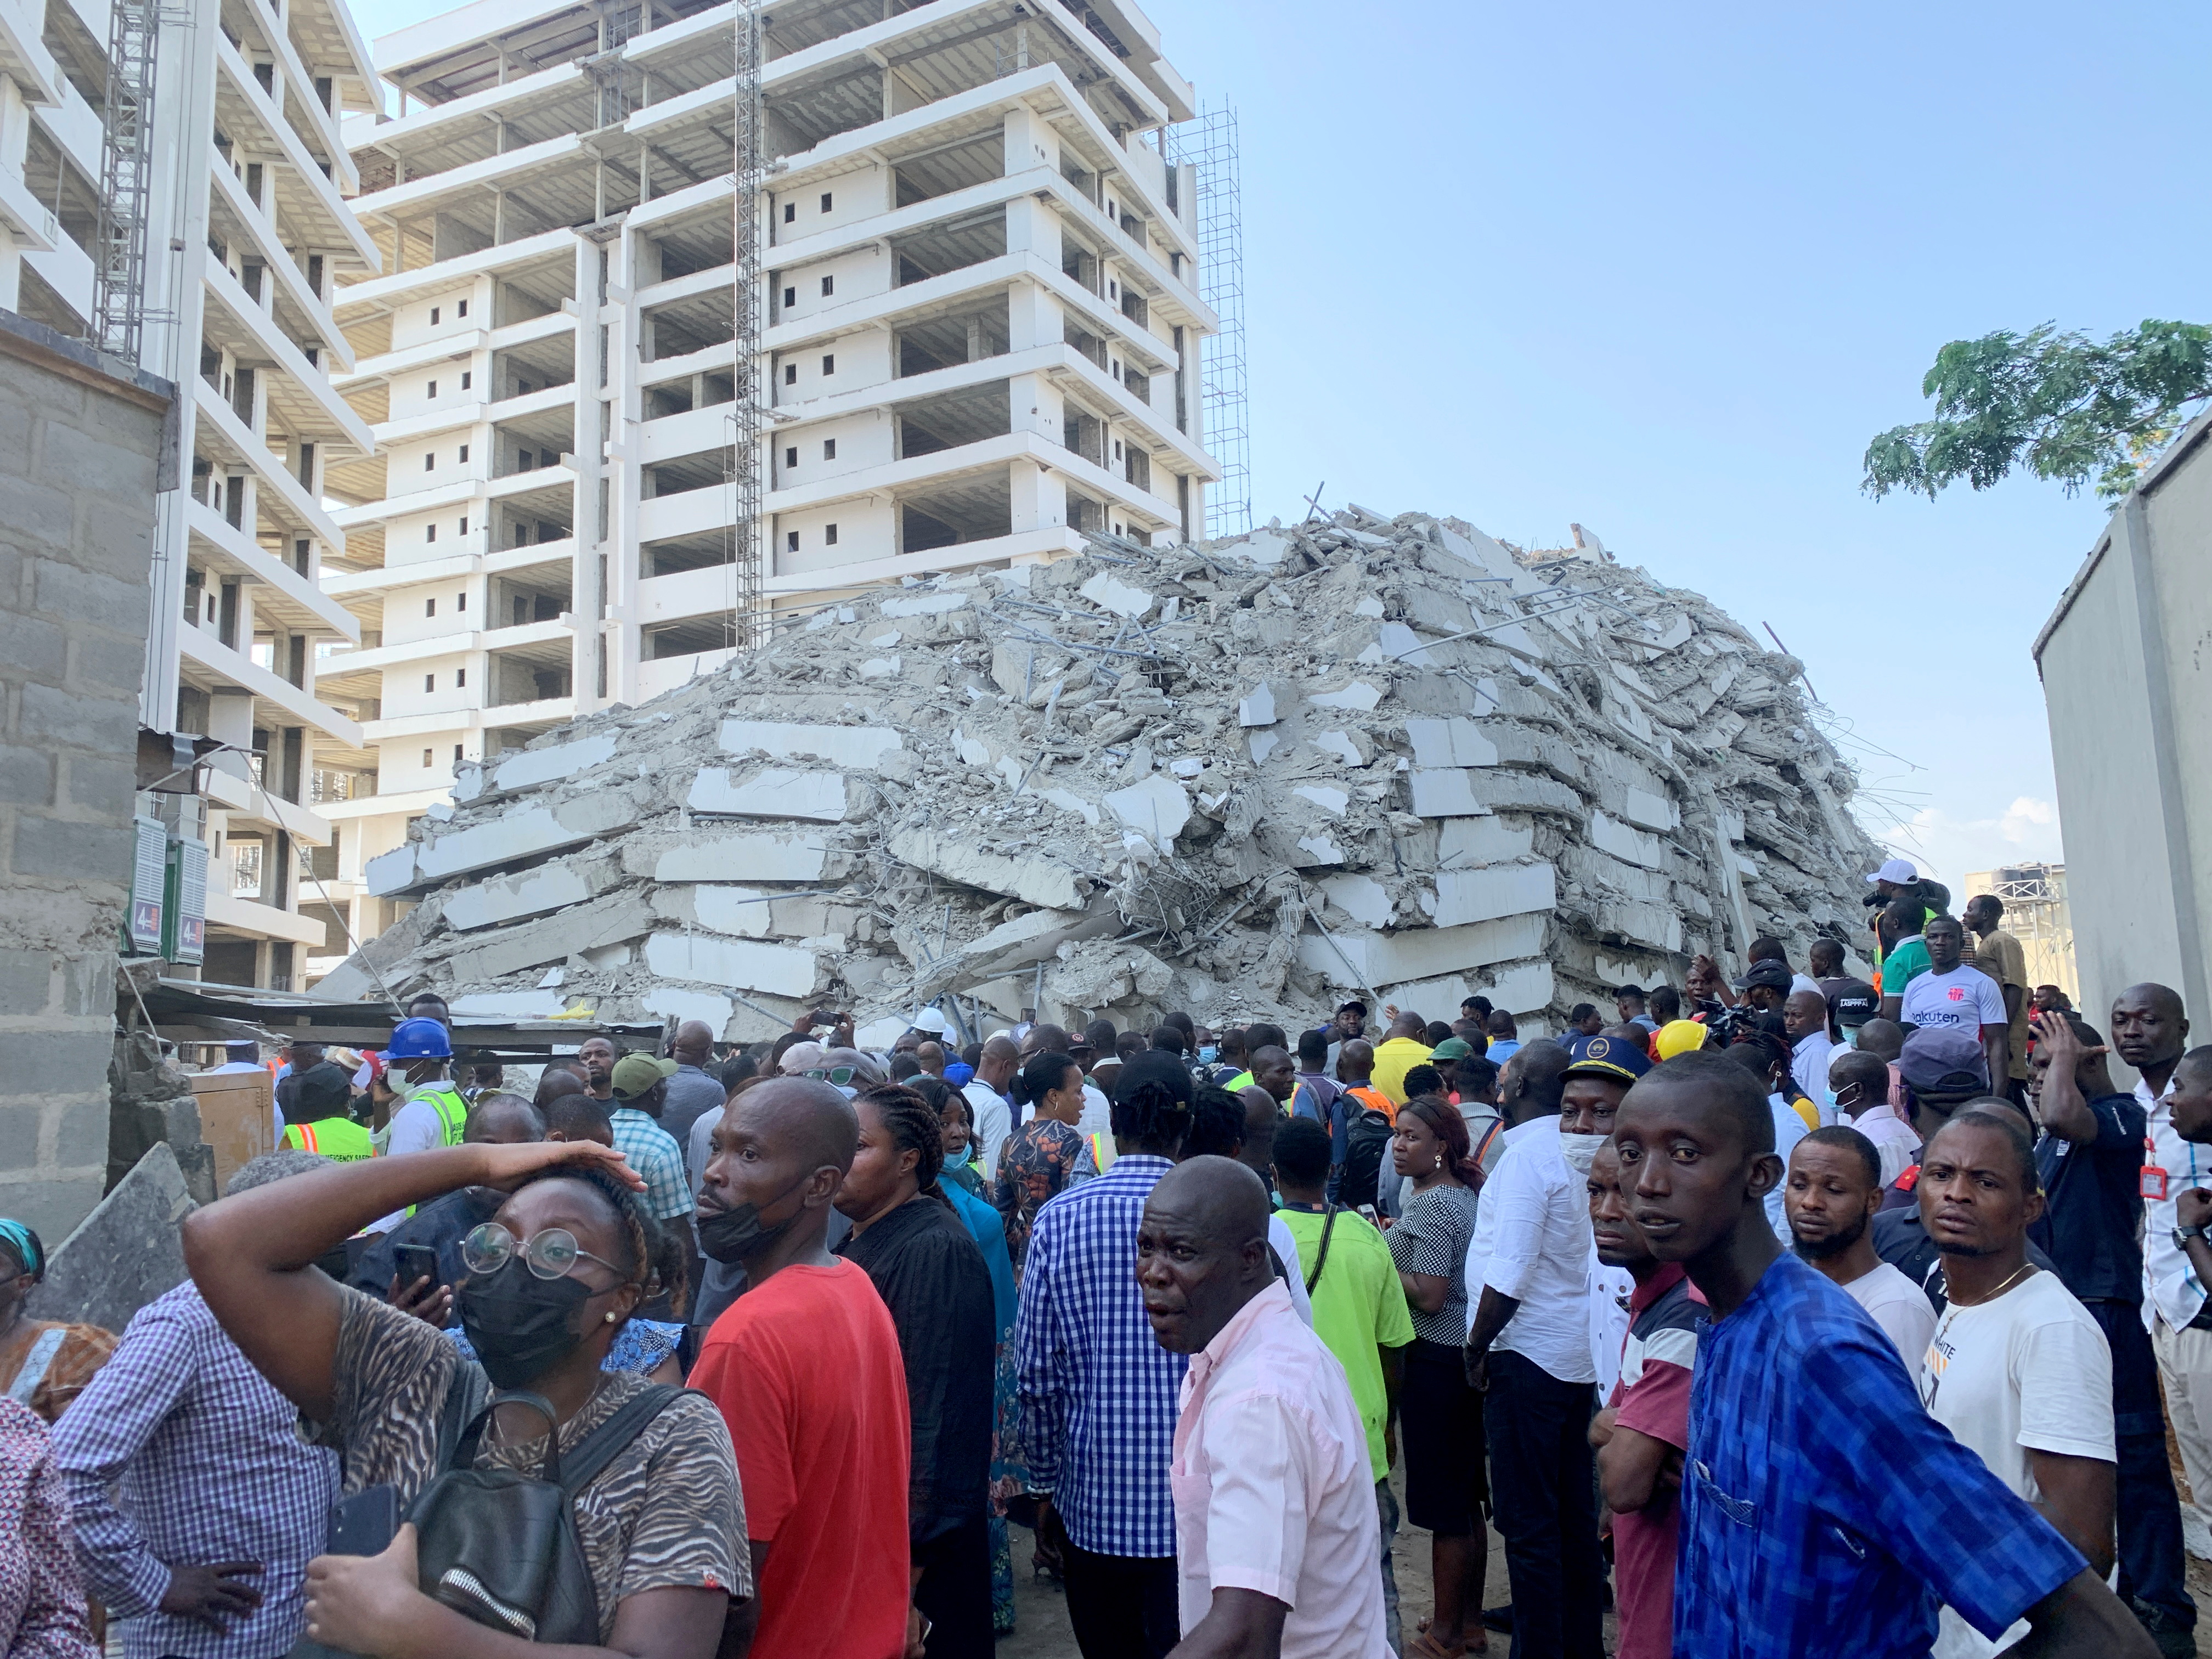 People gather at the site of a collapsed 21-story building in Ikoyi, Lagos, Nigeria, November 1, 2021. REUTERS/Temilade Adelaja